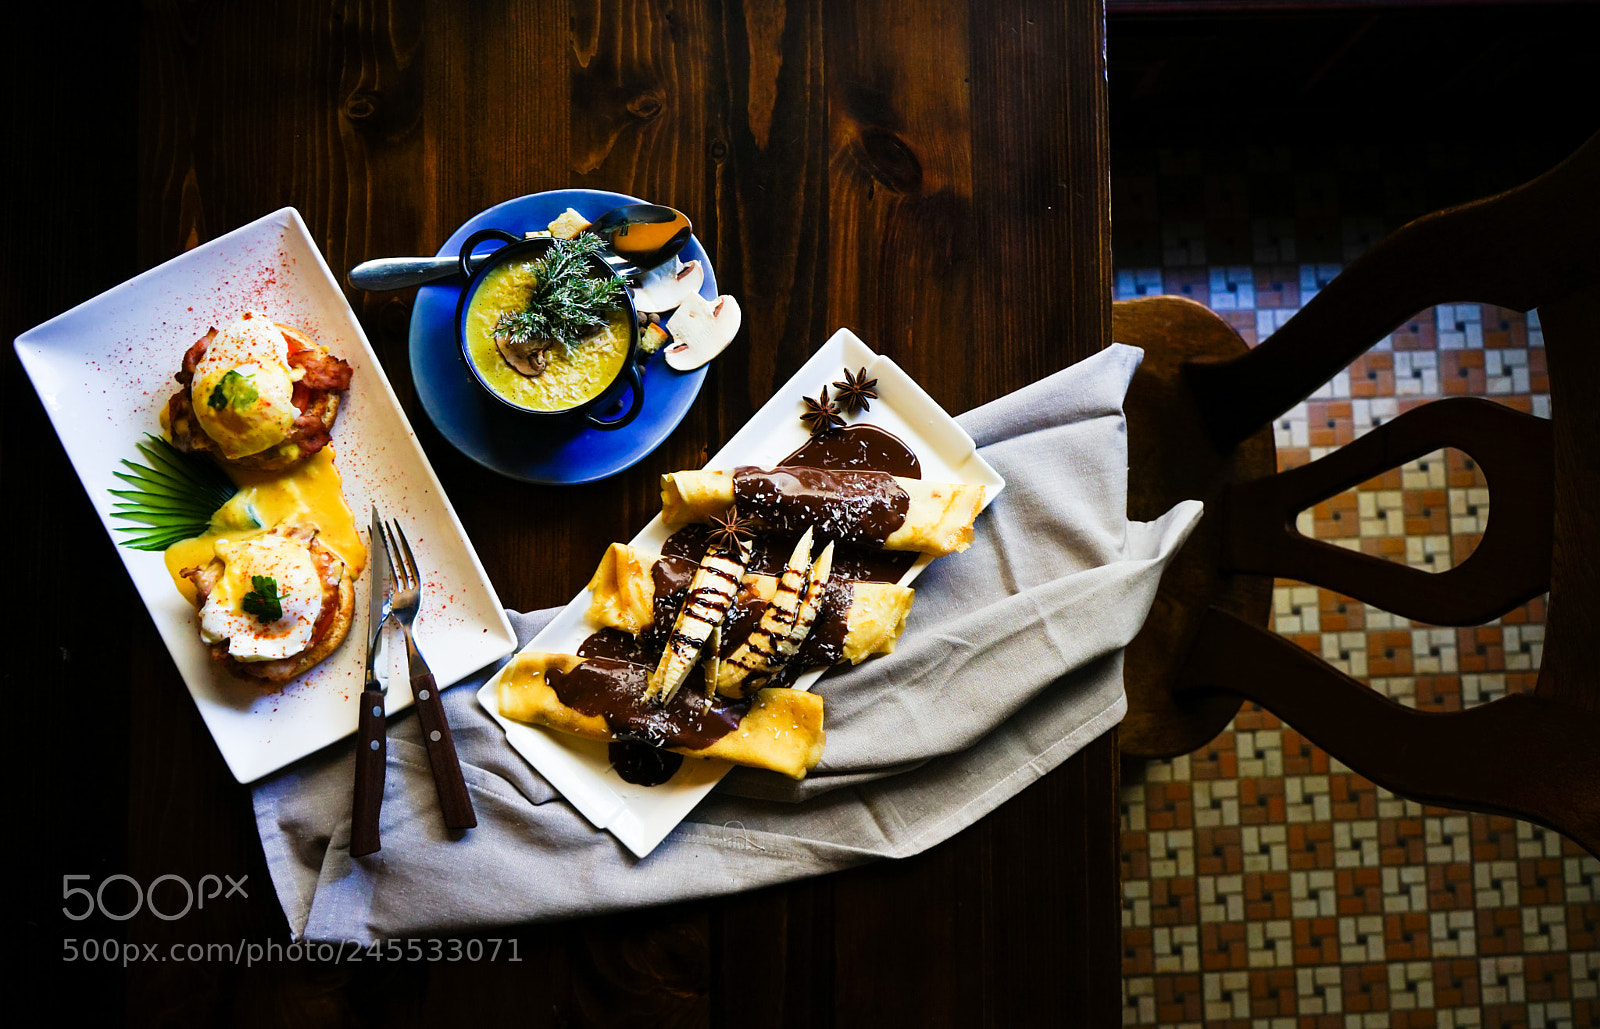 Sony a7 sample photo. Rustic dinner set photography